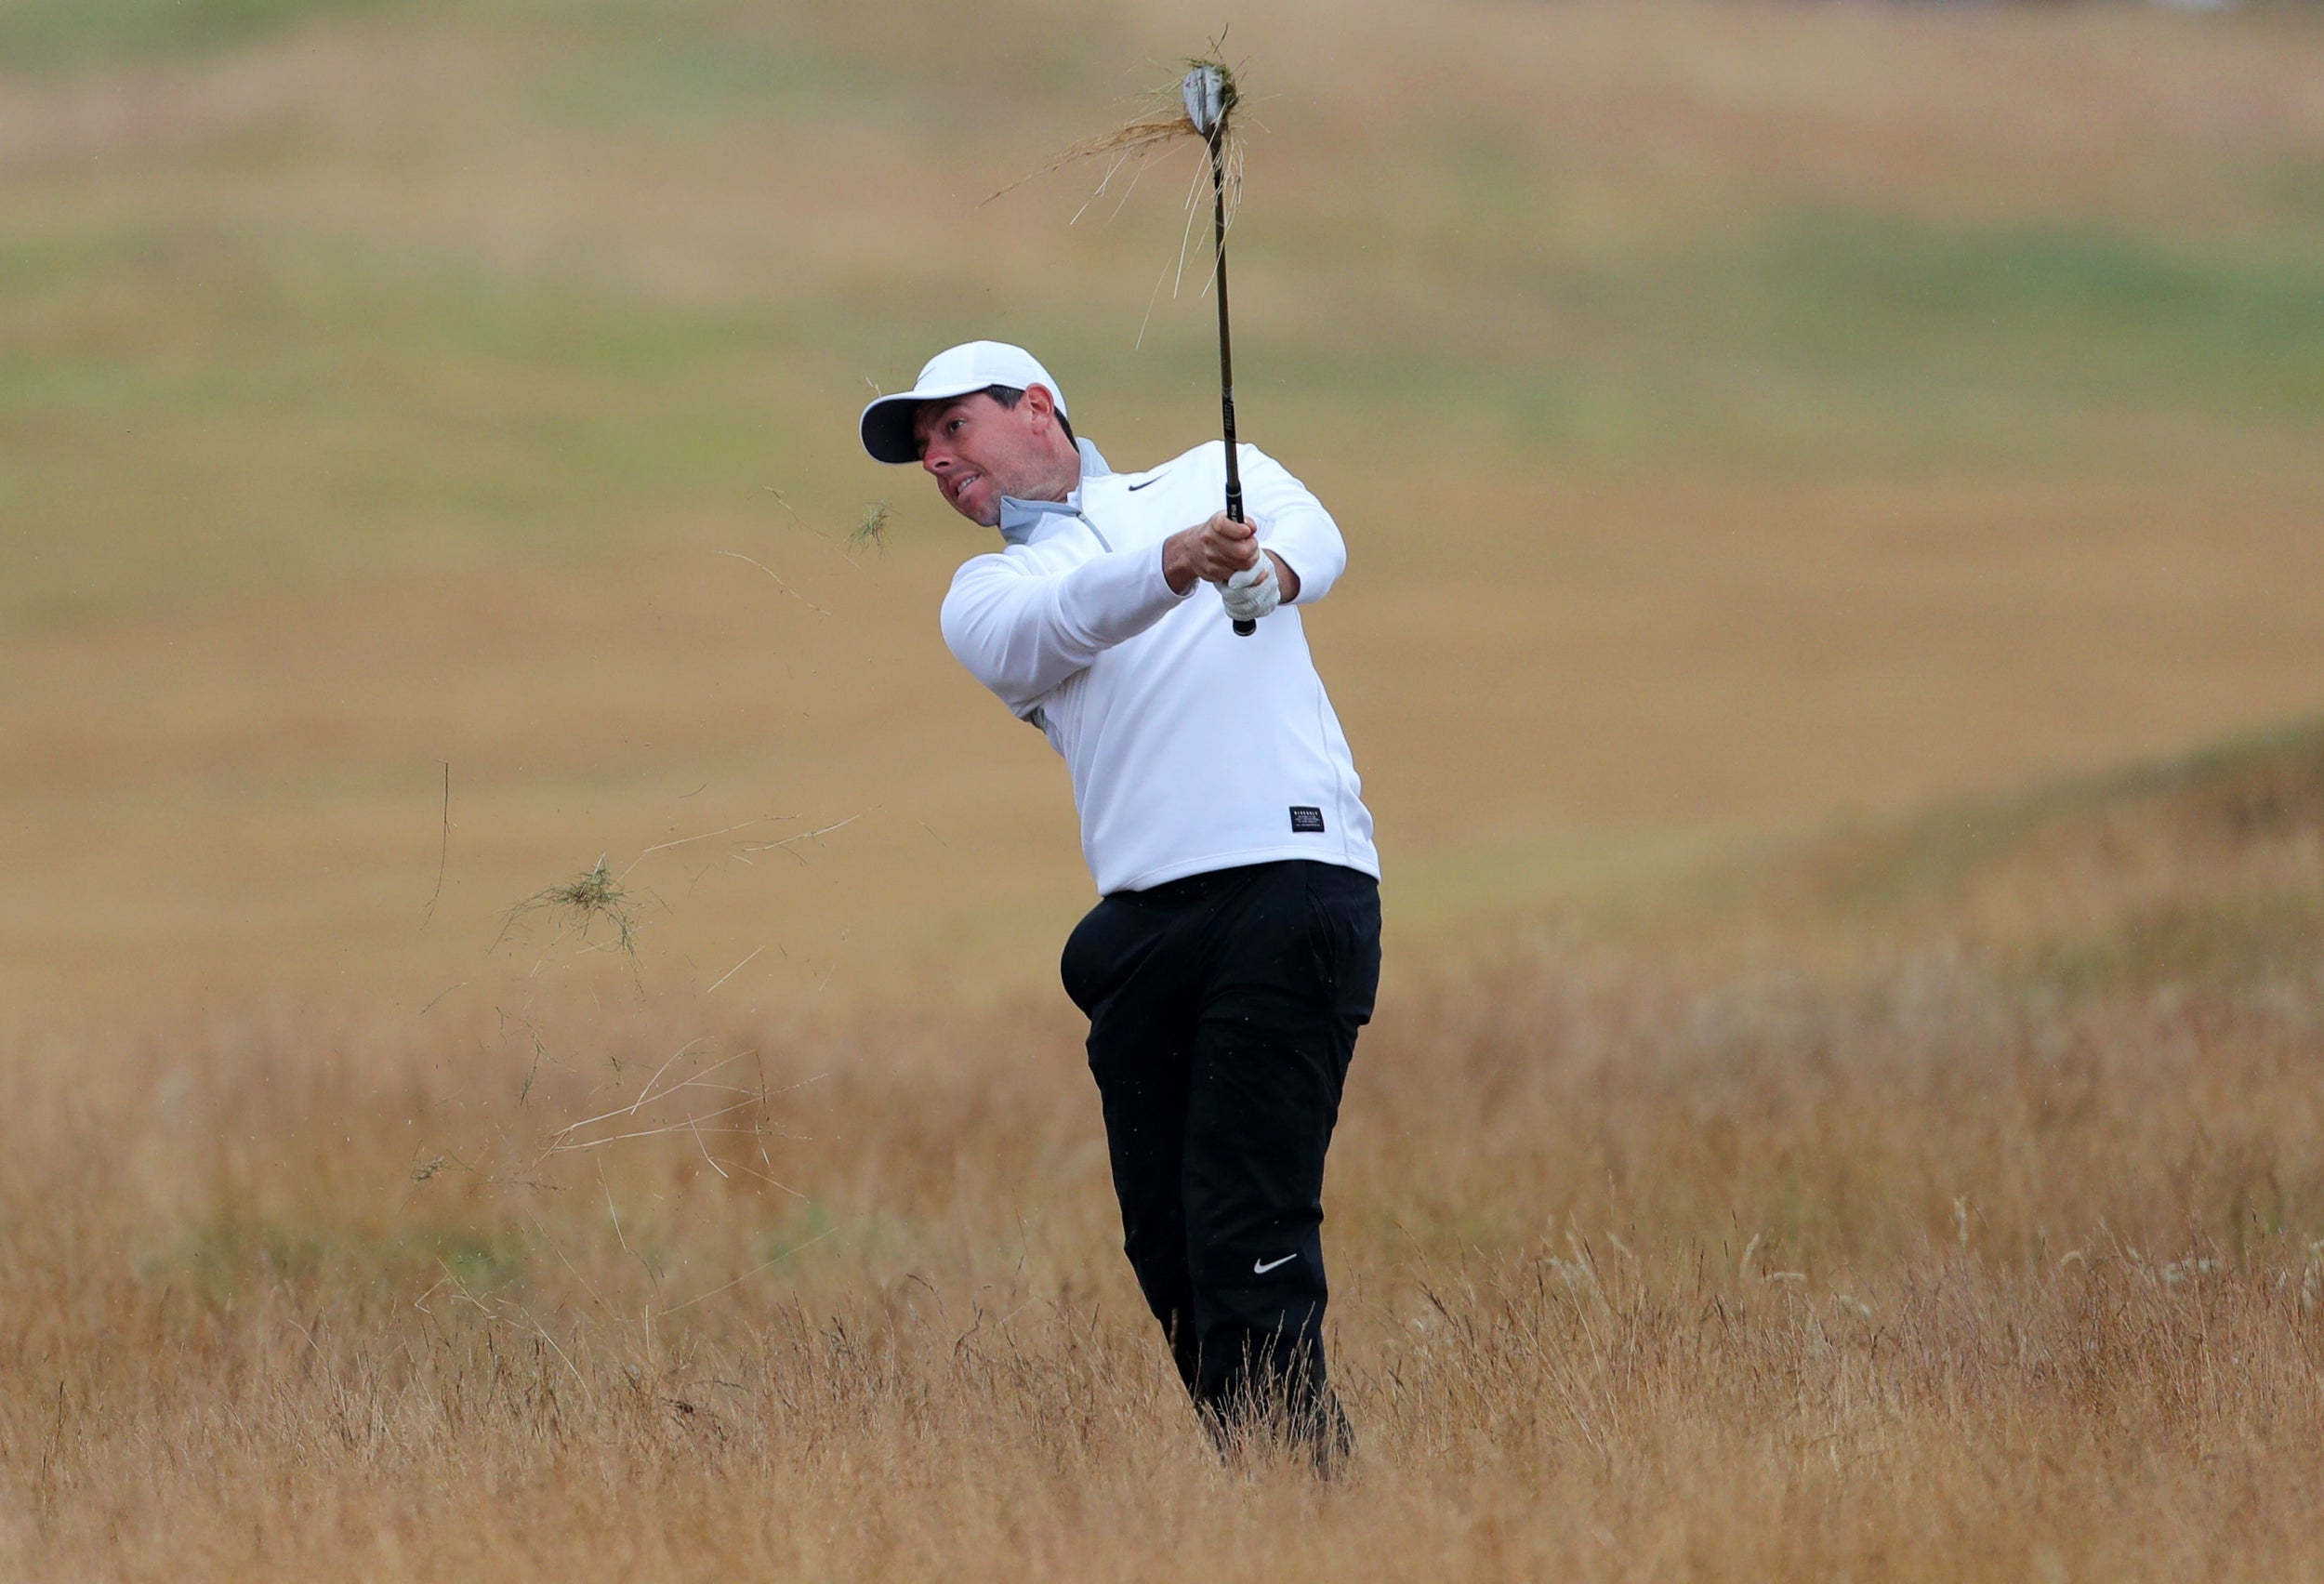 McIlroy found the rough a few times but, as he explained, that wasn't the end of the world